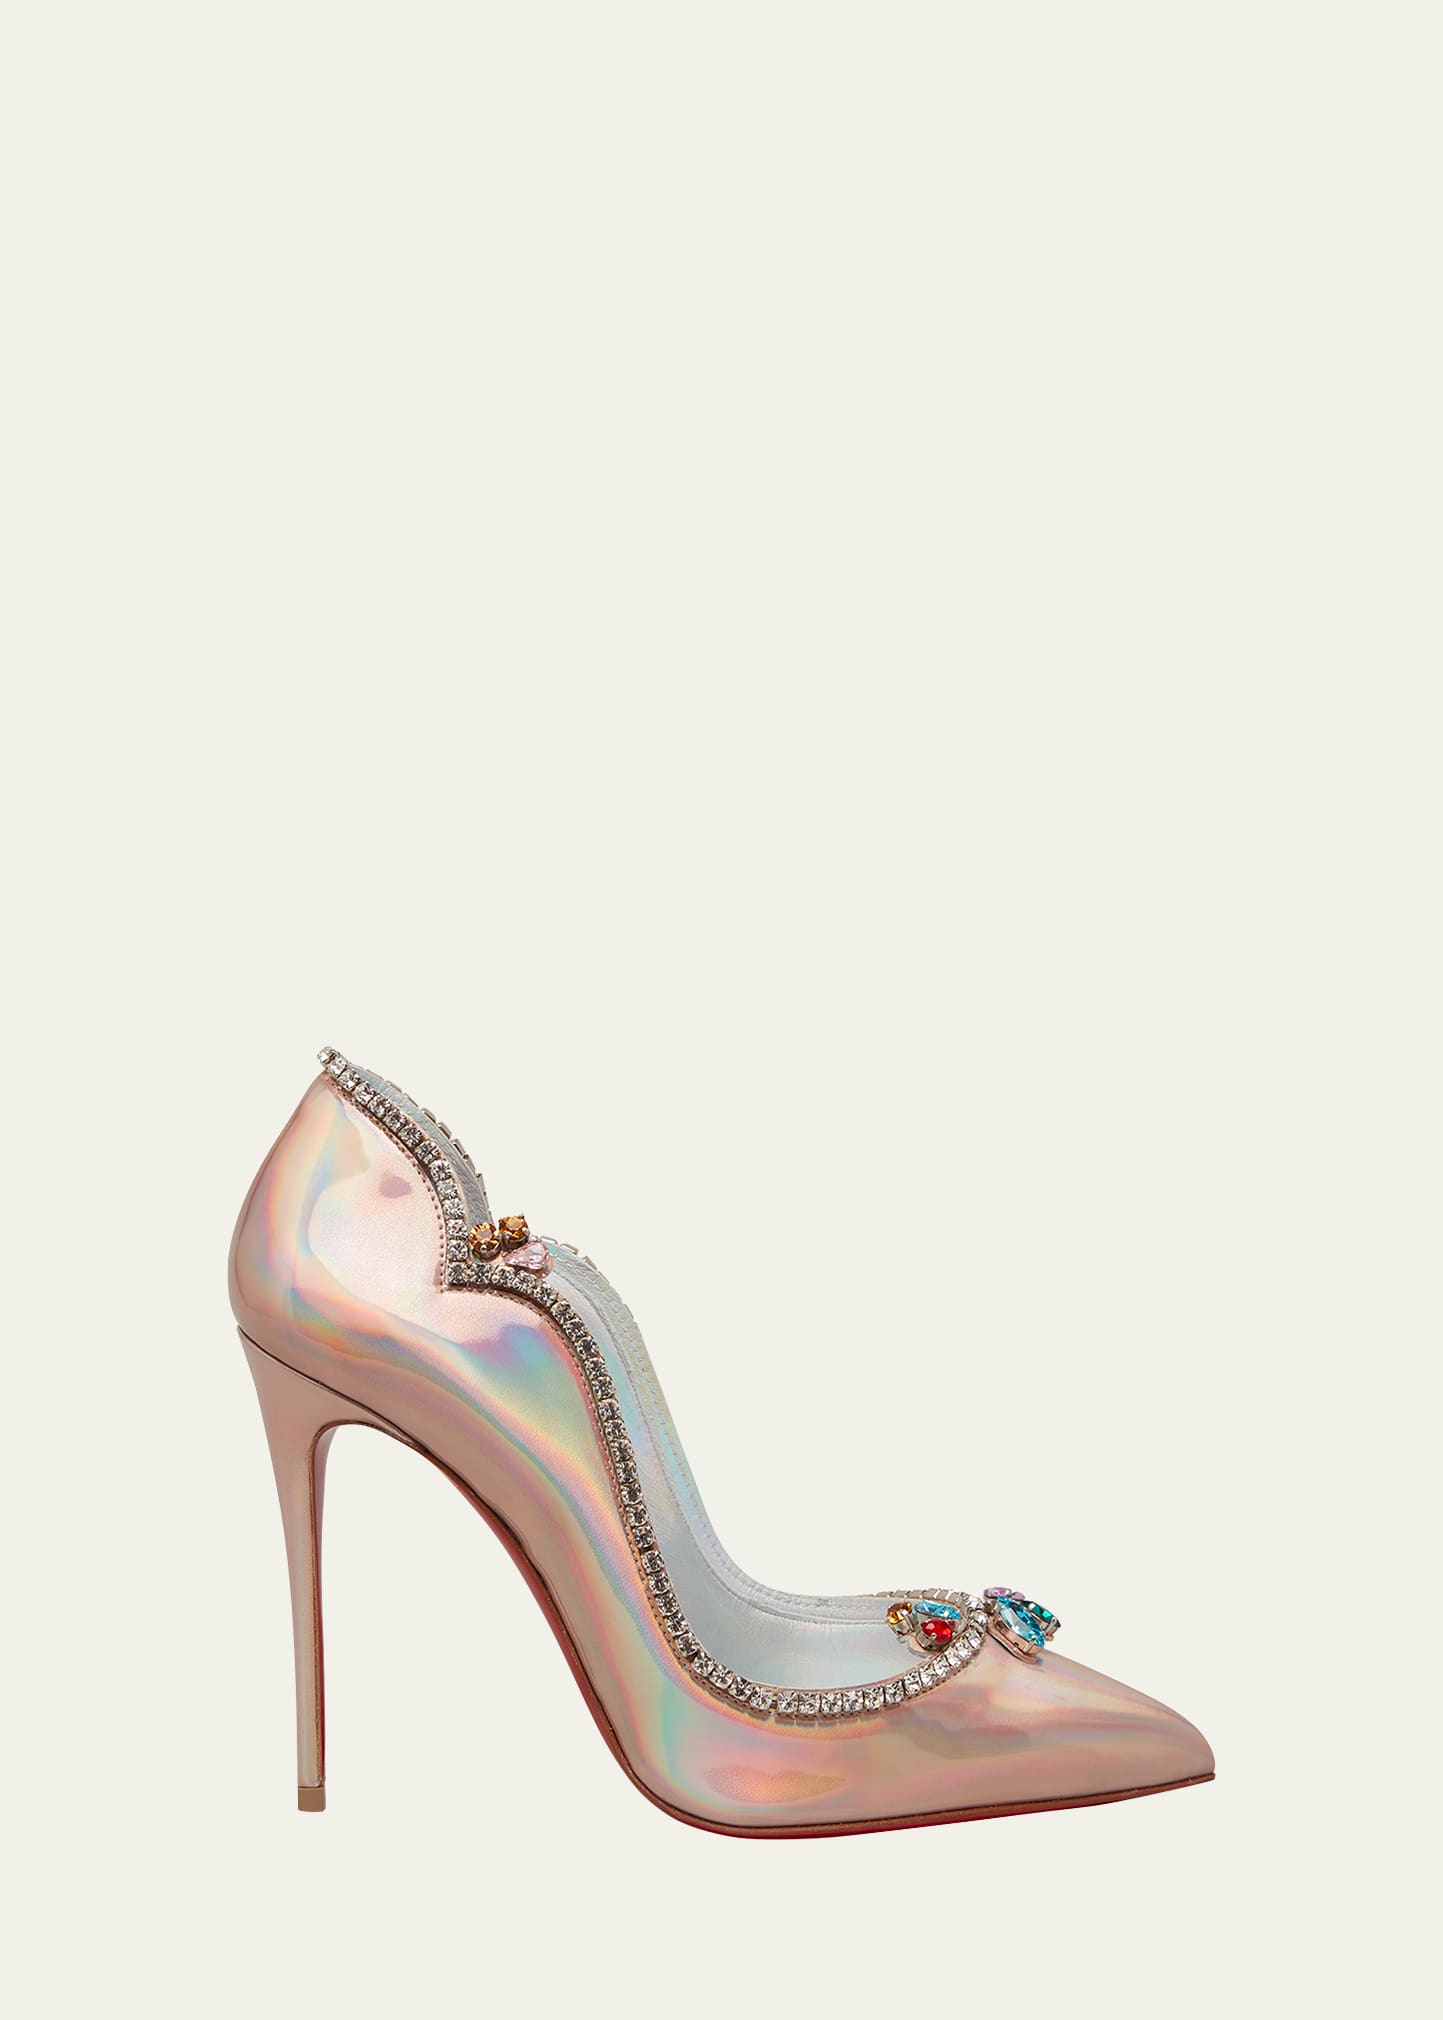 Christian Louboutin Chick Queen Iridescent Jewel Red Sole Pumps